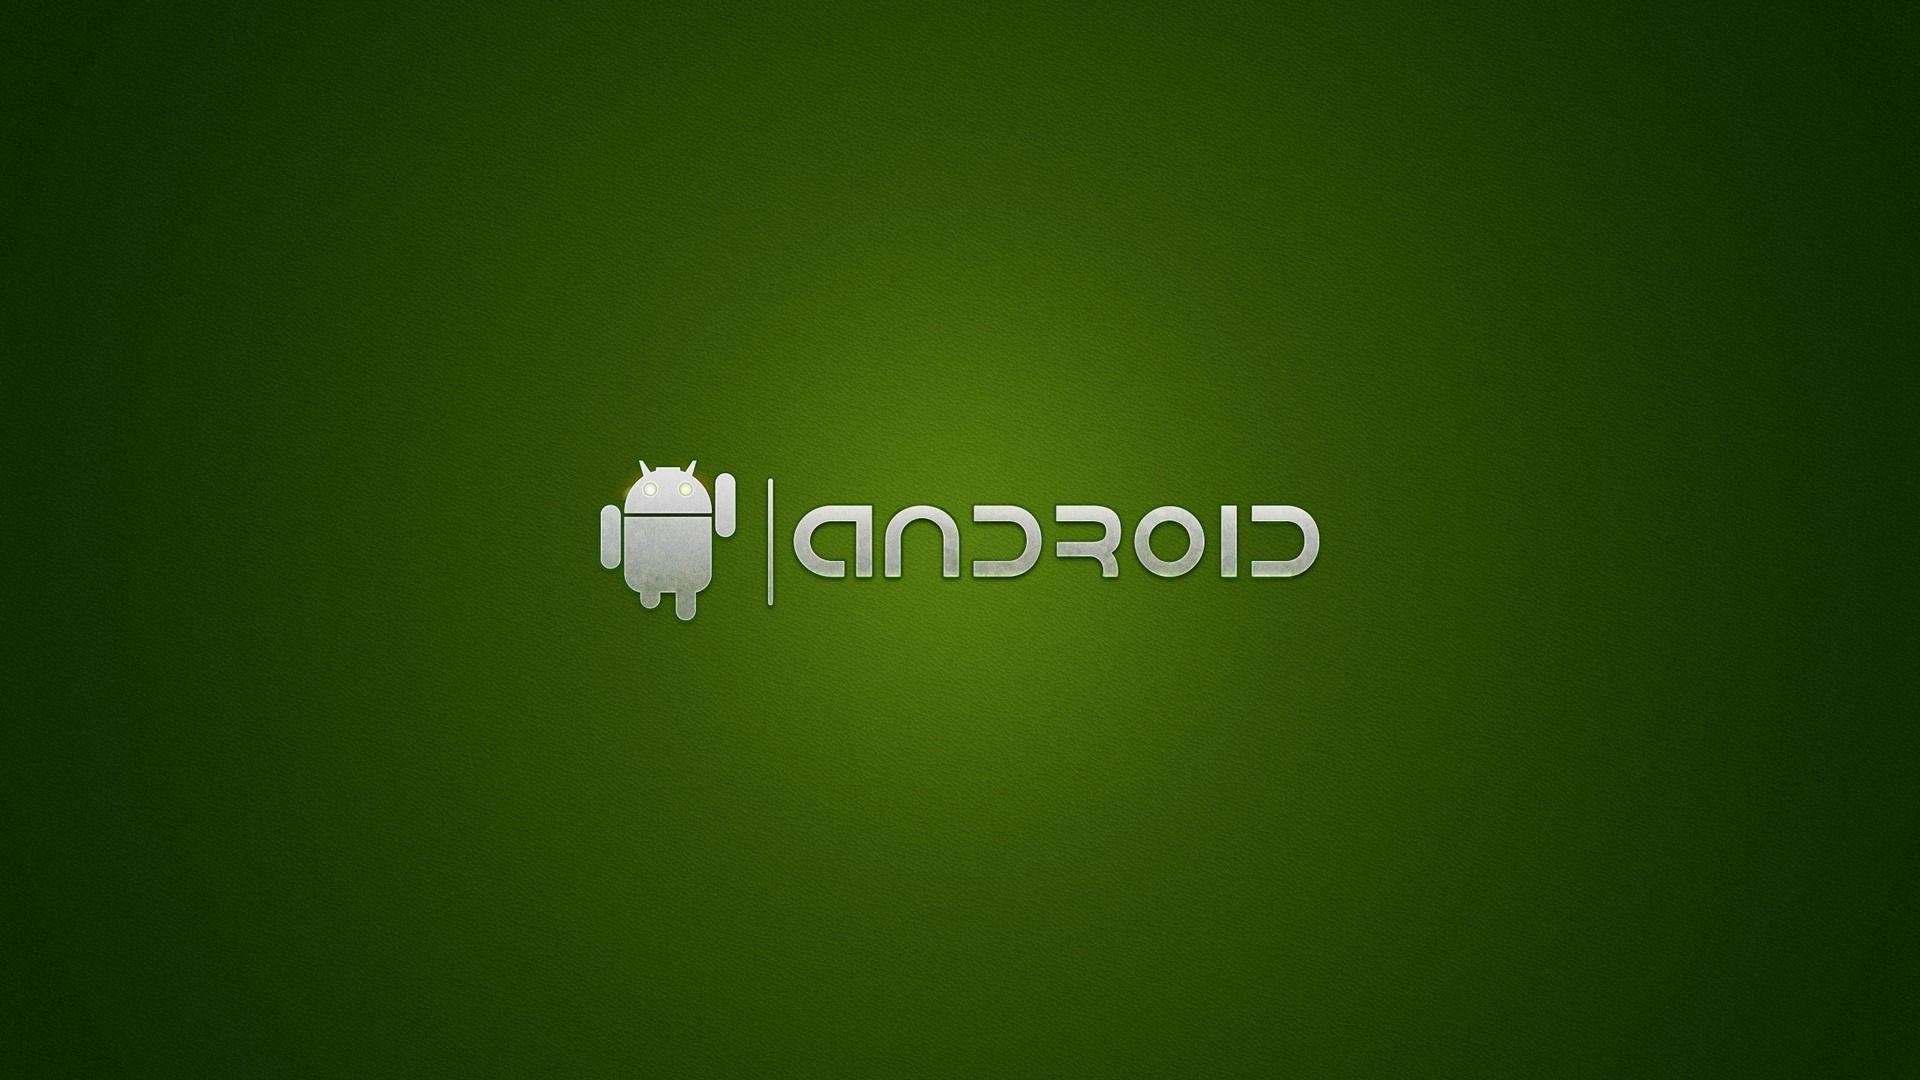 1920x1080 High Resolution Wallpapers For Android | Wide Wallpapers